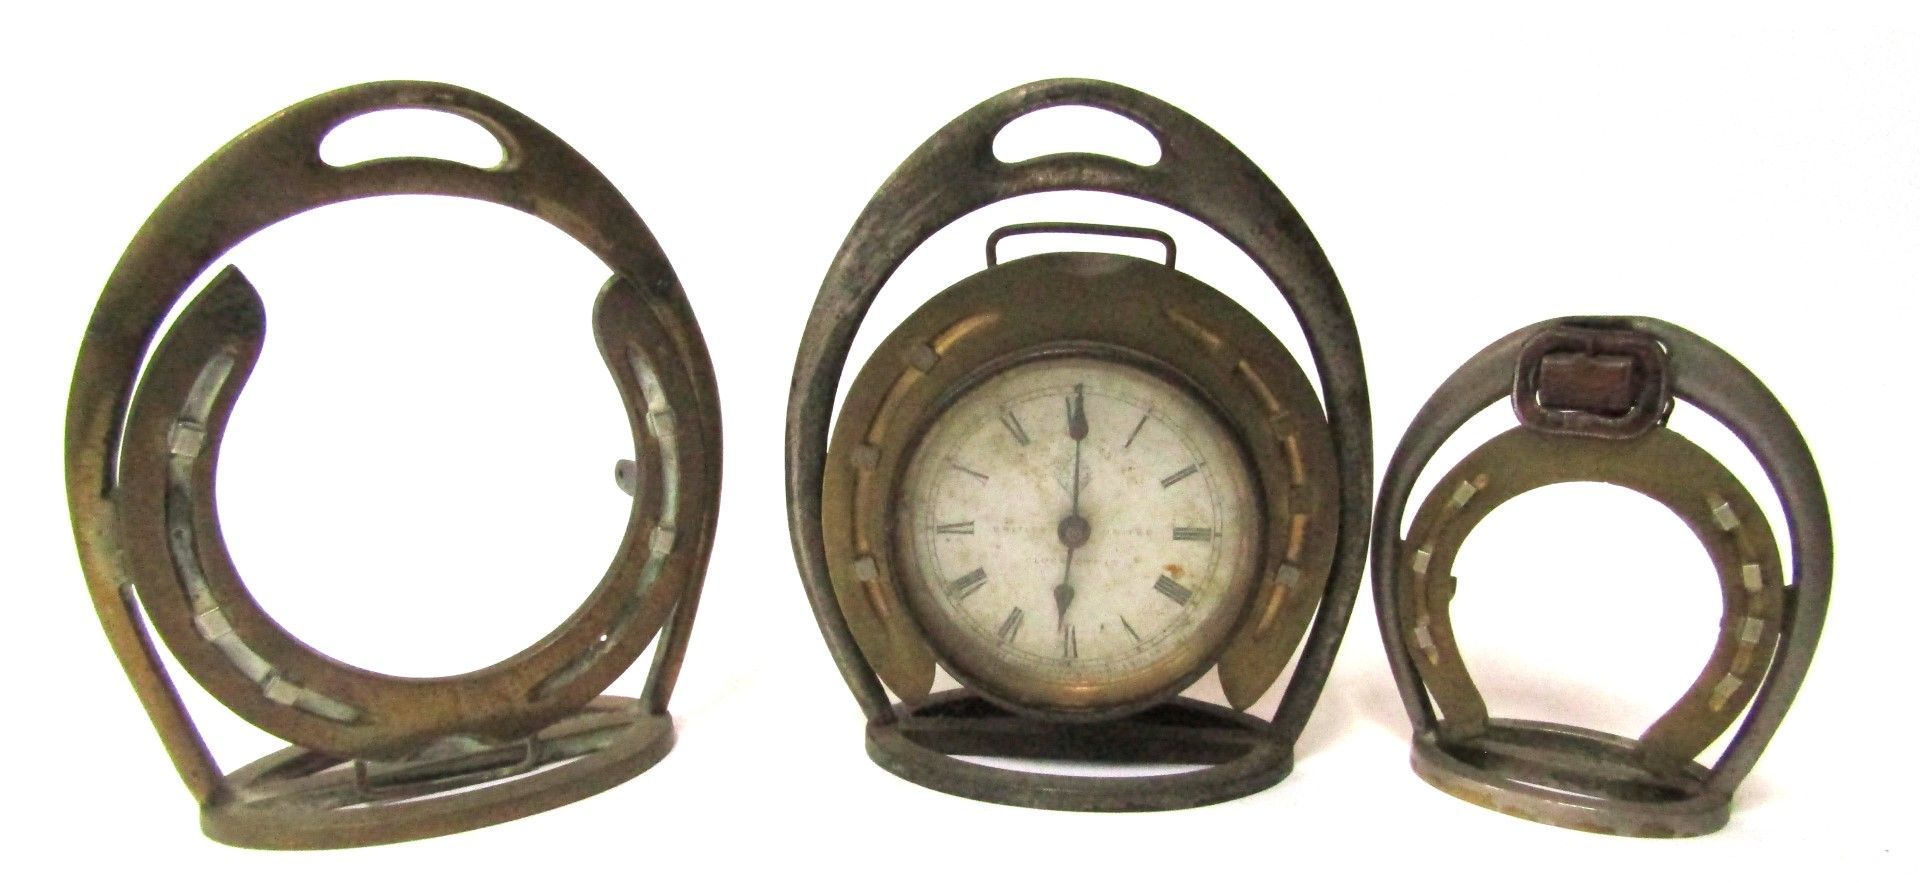 Three novelty clock stands, formed from a stirrup with horseshoe mount, one including clock face sta